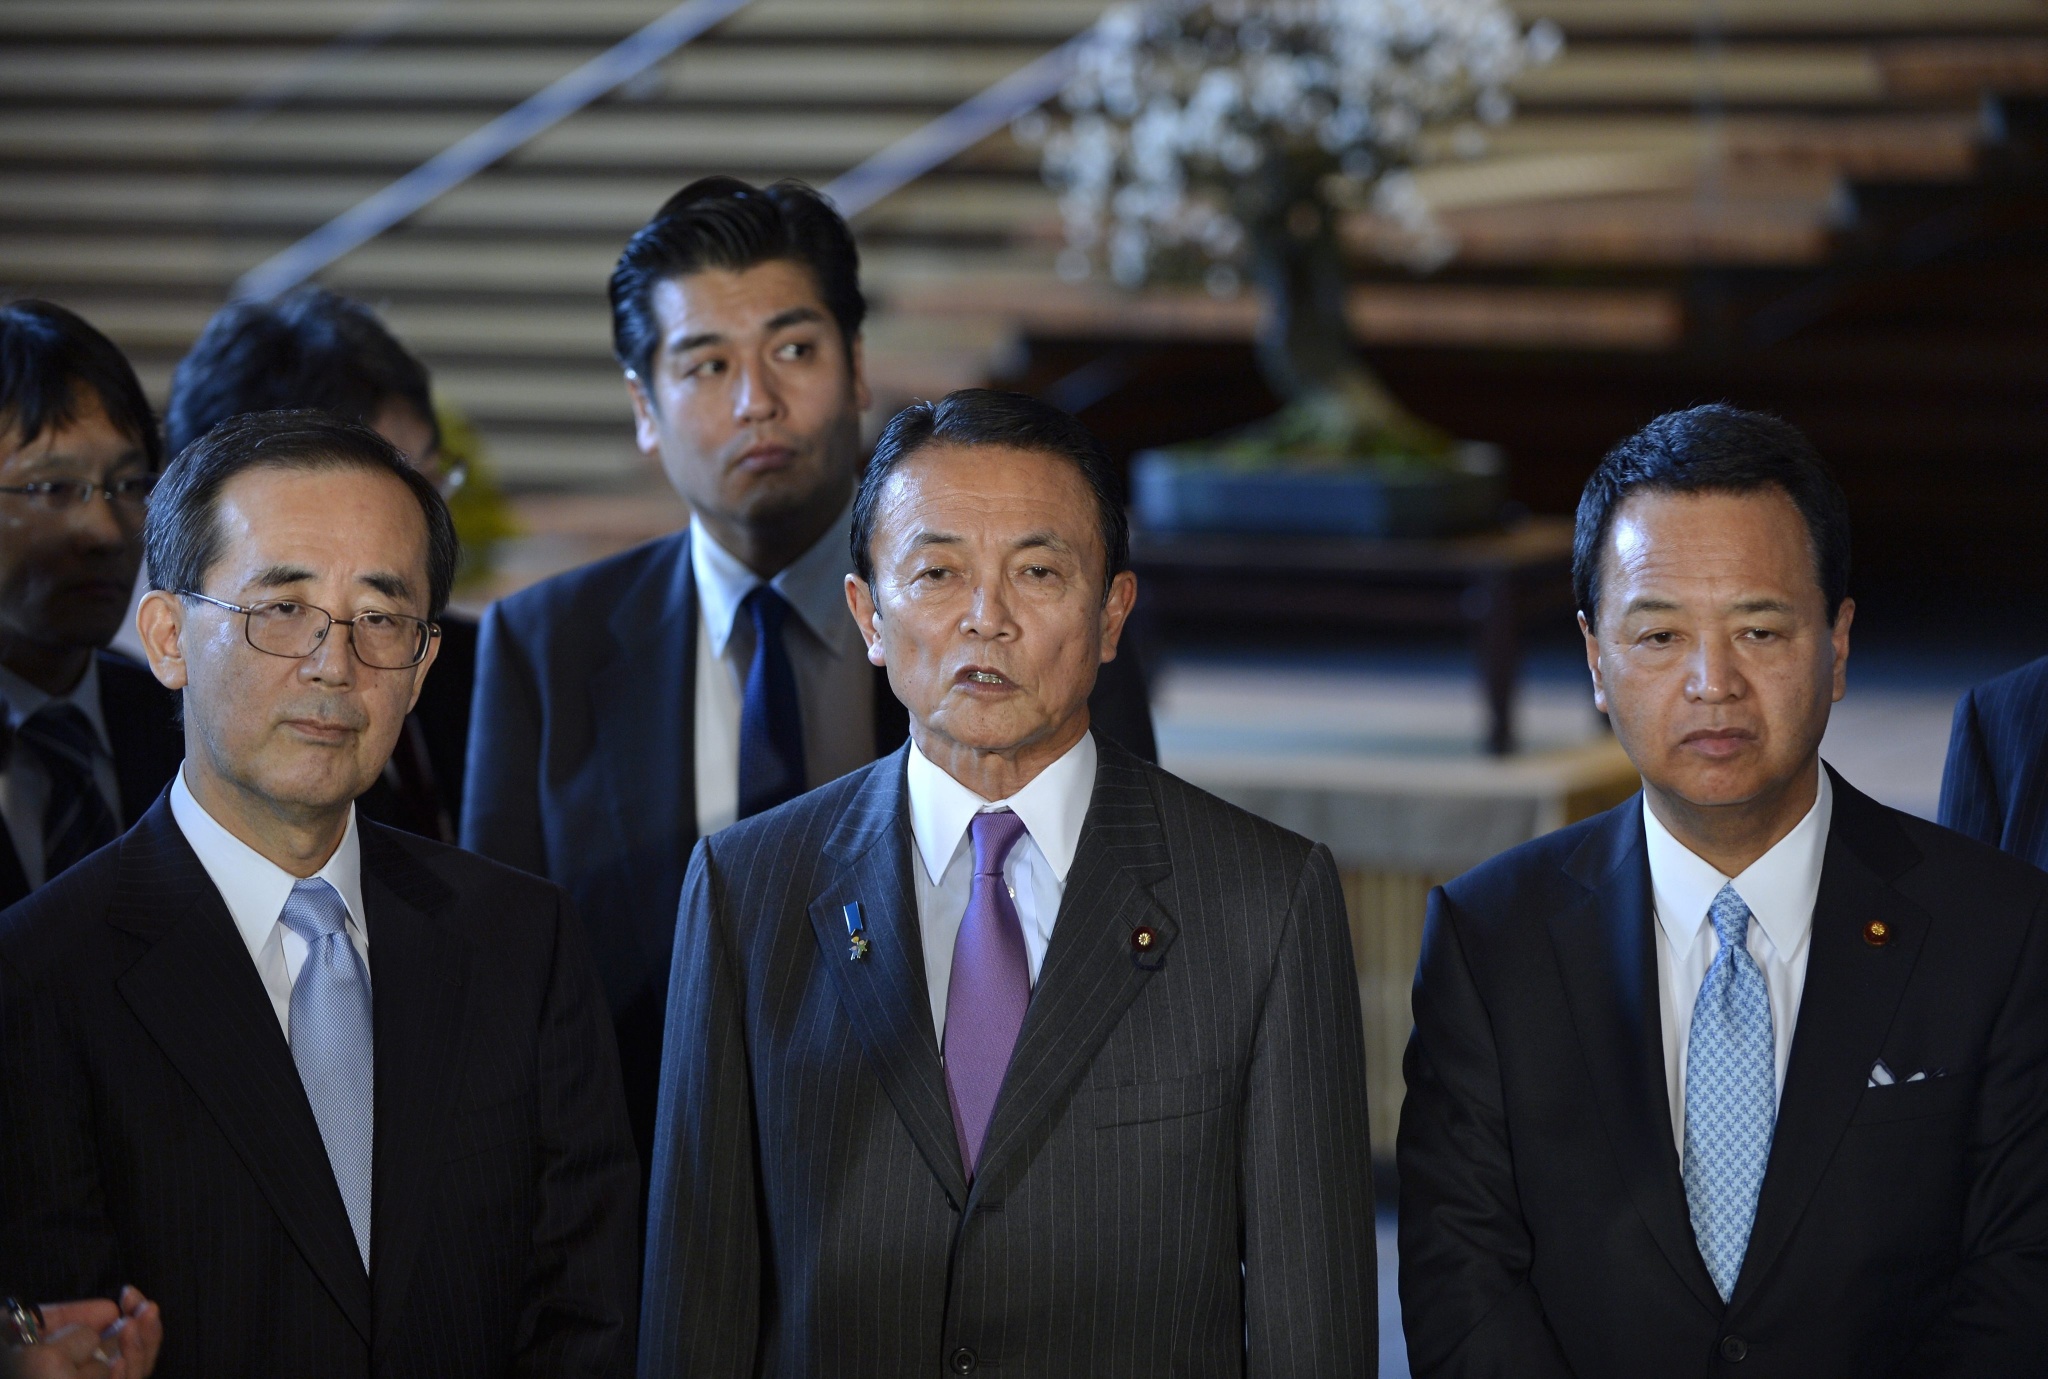 Japan's Finance Minister Taro Aso (C) speaks to reporters with Bank of Japan Governor Masaaki Shirakawa (L) and Economics Minister Akira Amari (R) at the prime minister's official residence in Tokyo. Photo: EPA